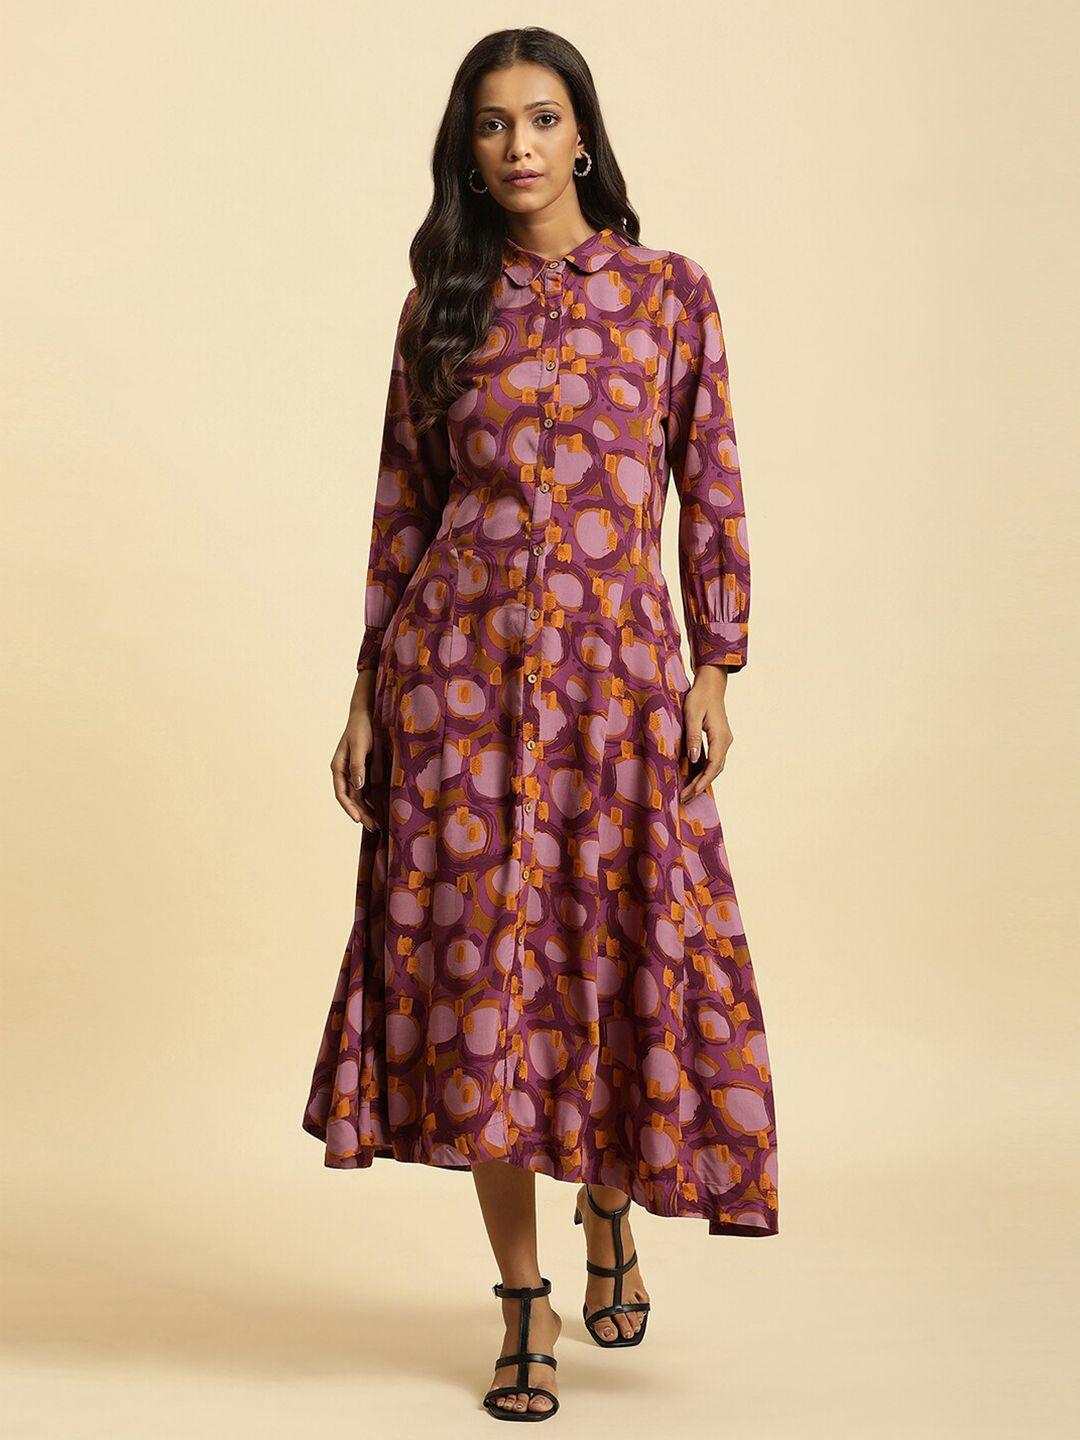 w-floral-printed-shirt-collar-cuffed-sleeves-shirt-style-dress